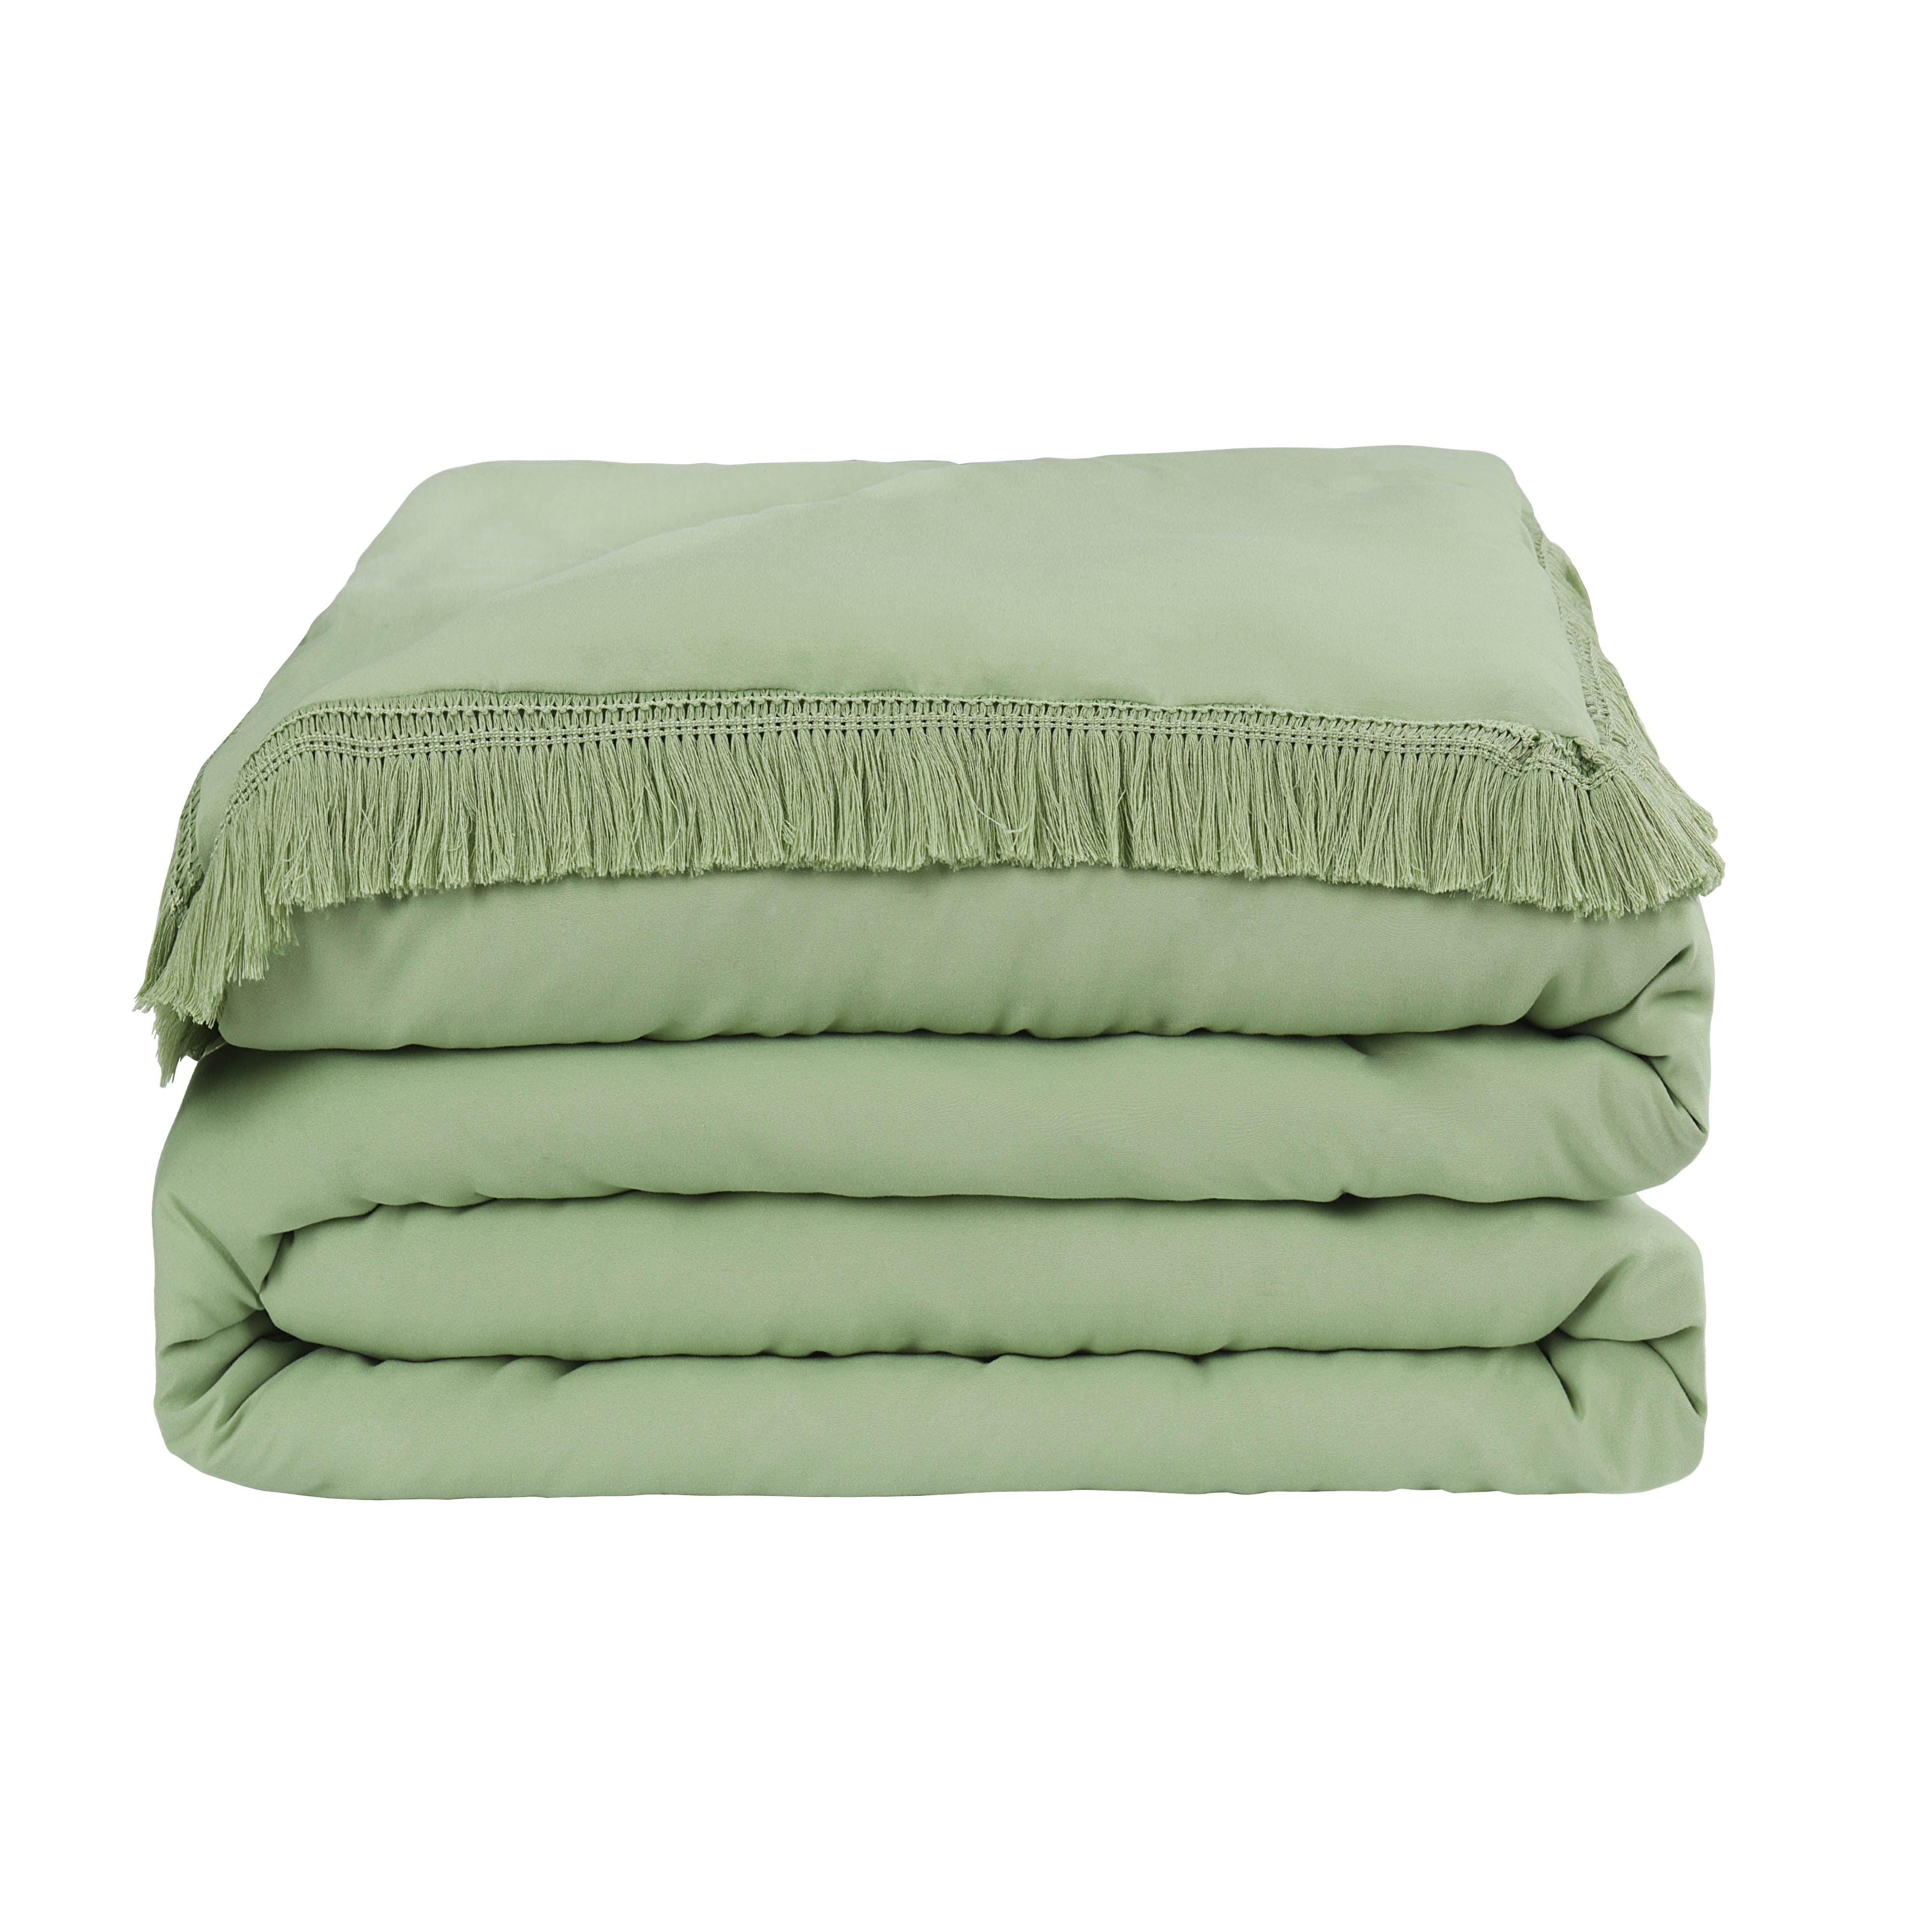 COLIN 3PC GREEN BEDDING COMFORTER SET. RUFFLE & PATCHWORK, MICROFIBER FABRIC, FADE RESISTANT, SUPER SOFT, BED IN A BAG